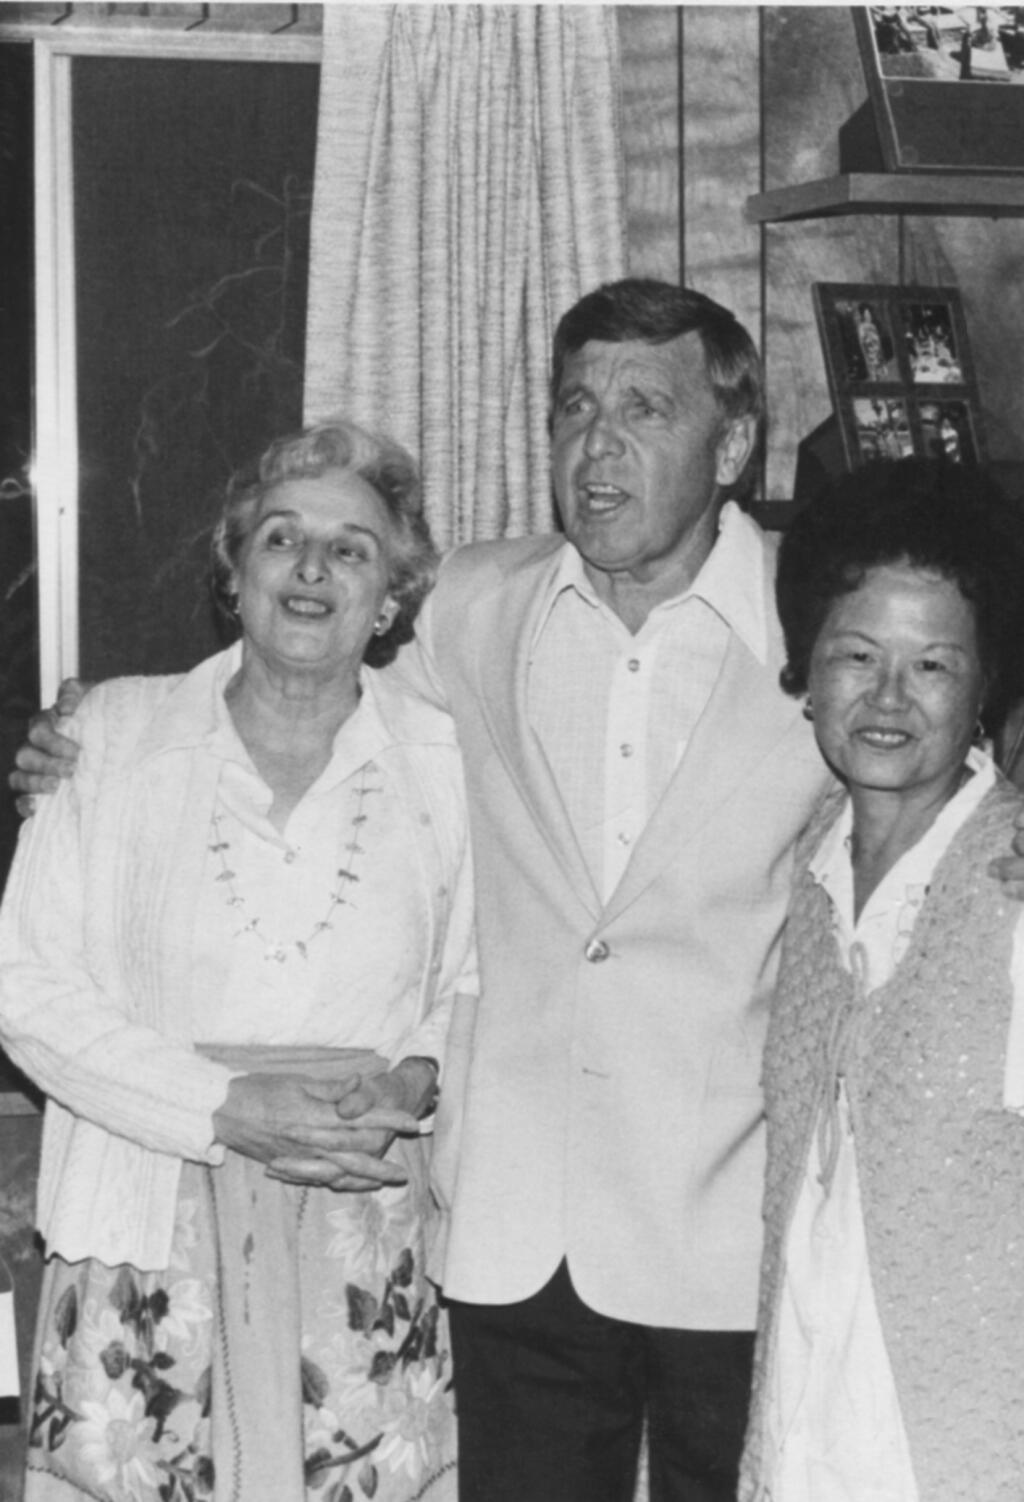 Bill Lynch’s dad, Robert Lynch (center) and their entire family were frequent diners at the Swiss Hotel, then managed by Helen Dunlap (left) while Nancy Wing (right) and husband Freddie ran the kitchen. Today, Helen’s granddaughter, Kristin, runs the restaurant. (I-T file photo)